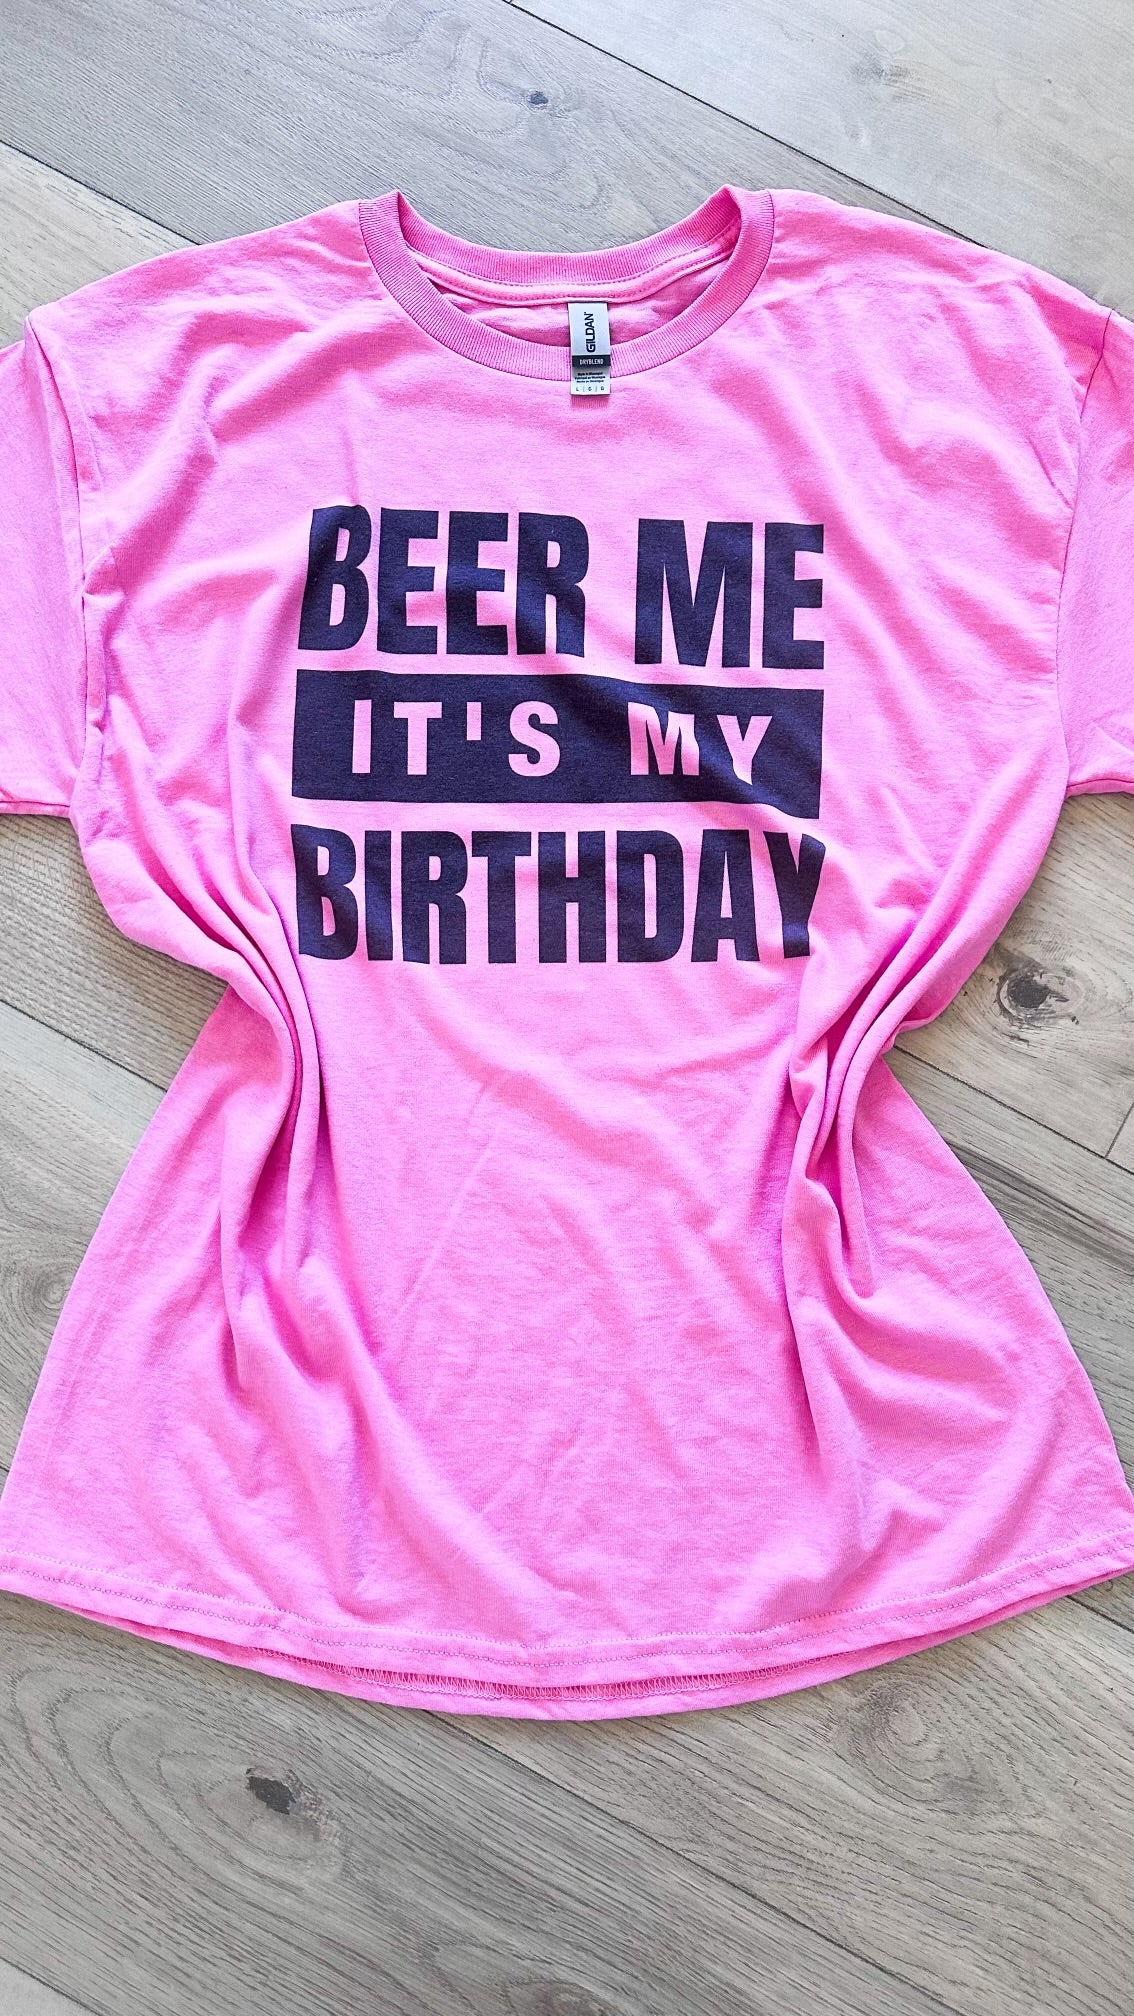 Beer Me Its My Birthday Graphic